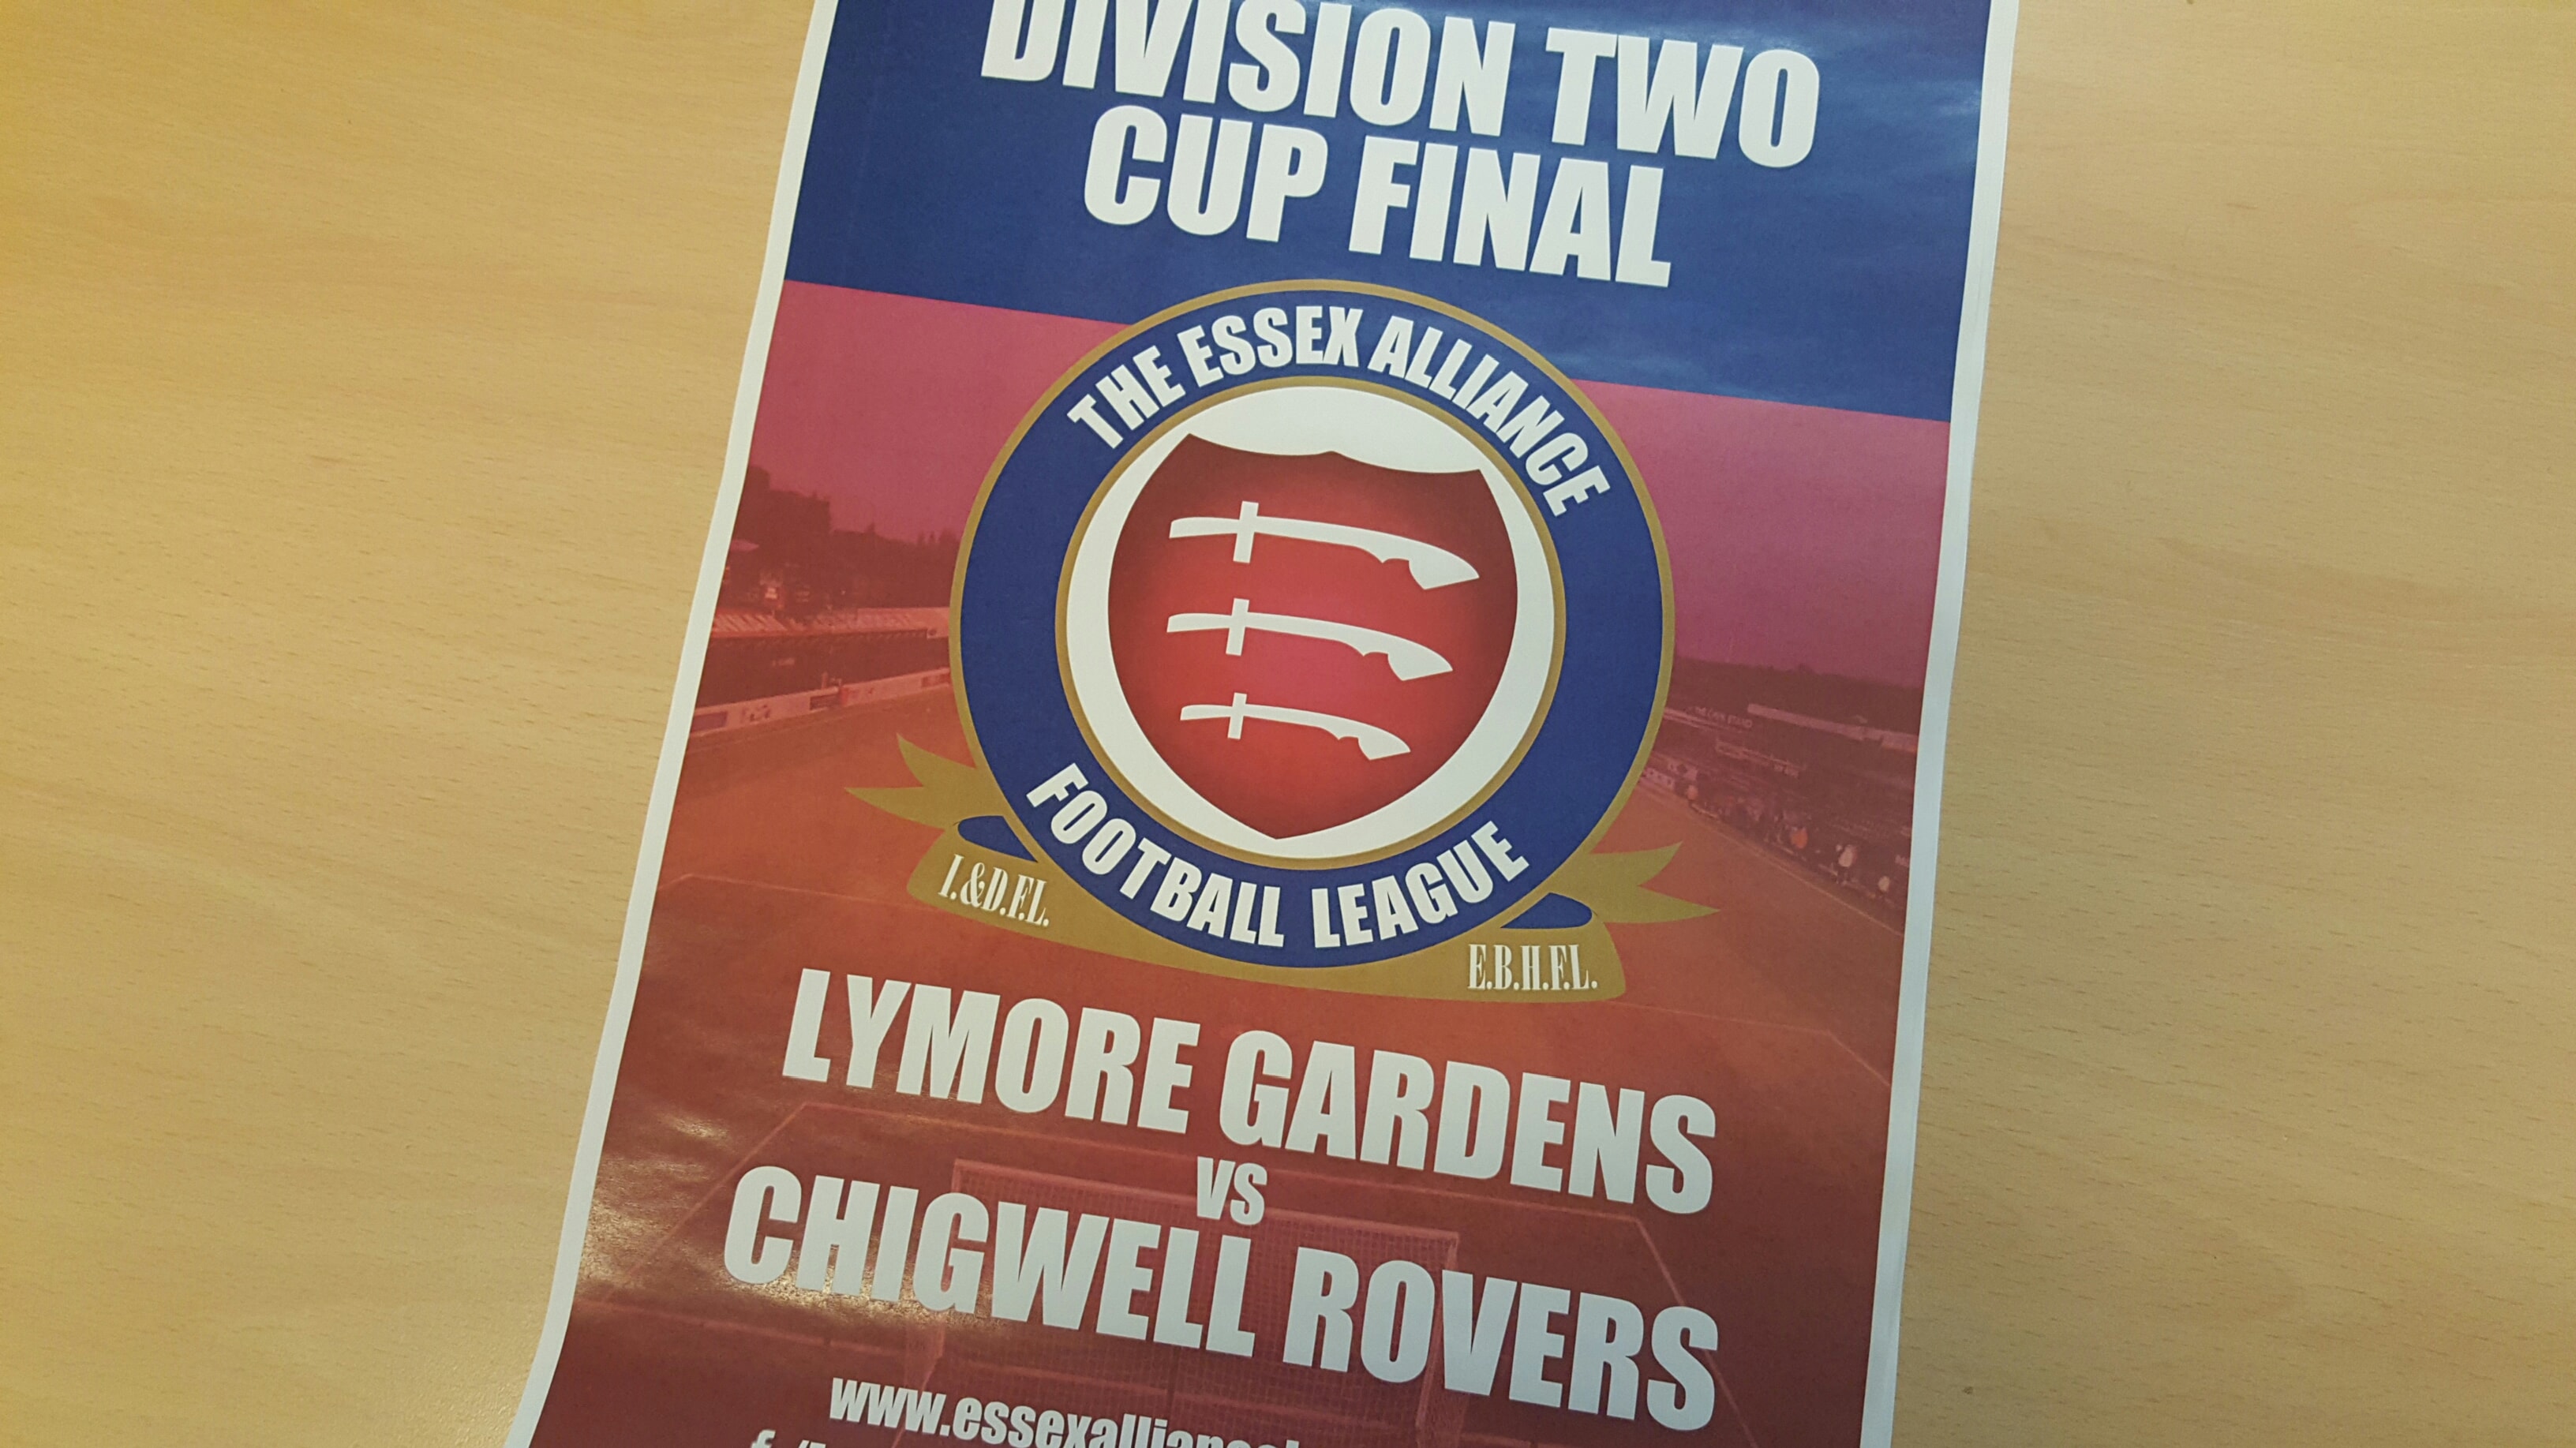 CUP FINAL PREVIEW: Lymore Gardens and Chigwell Rovers in Division 2 Cup Final showdown